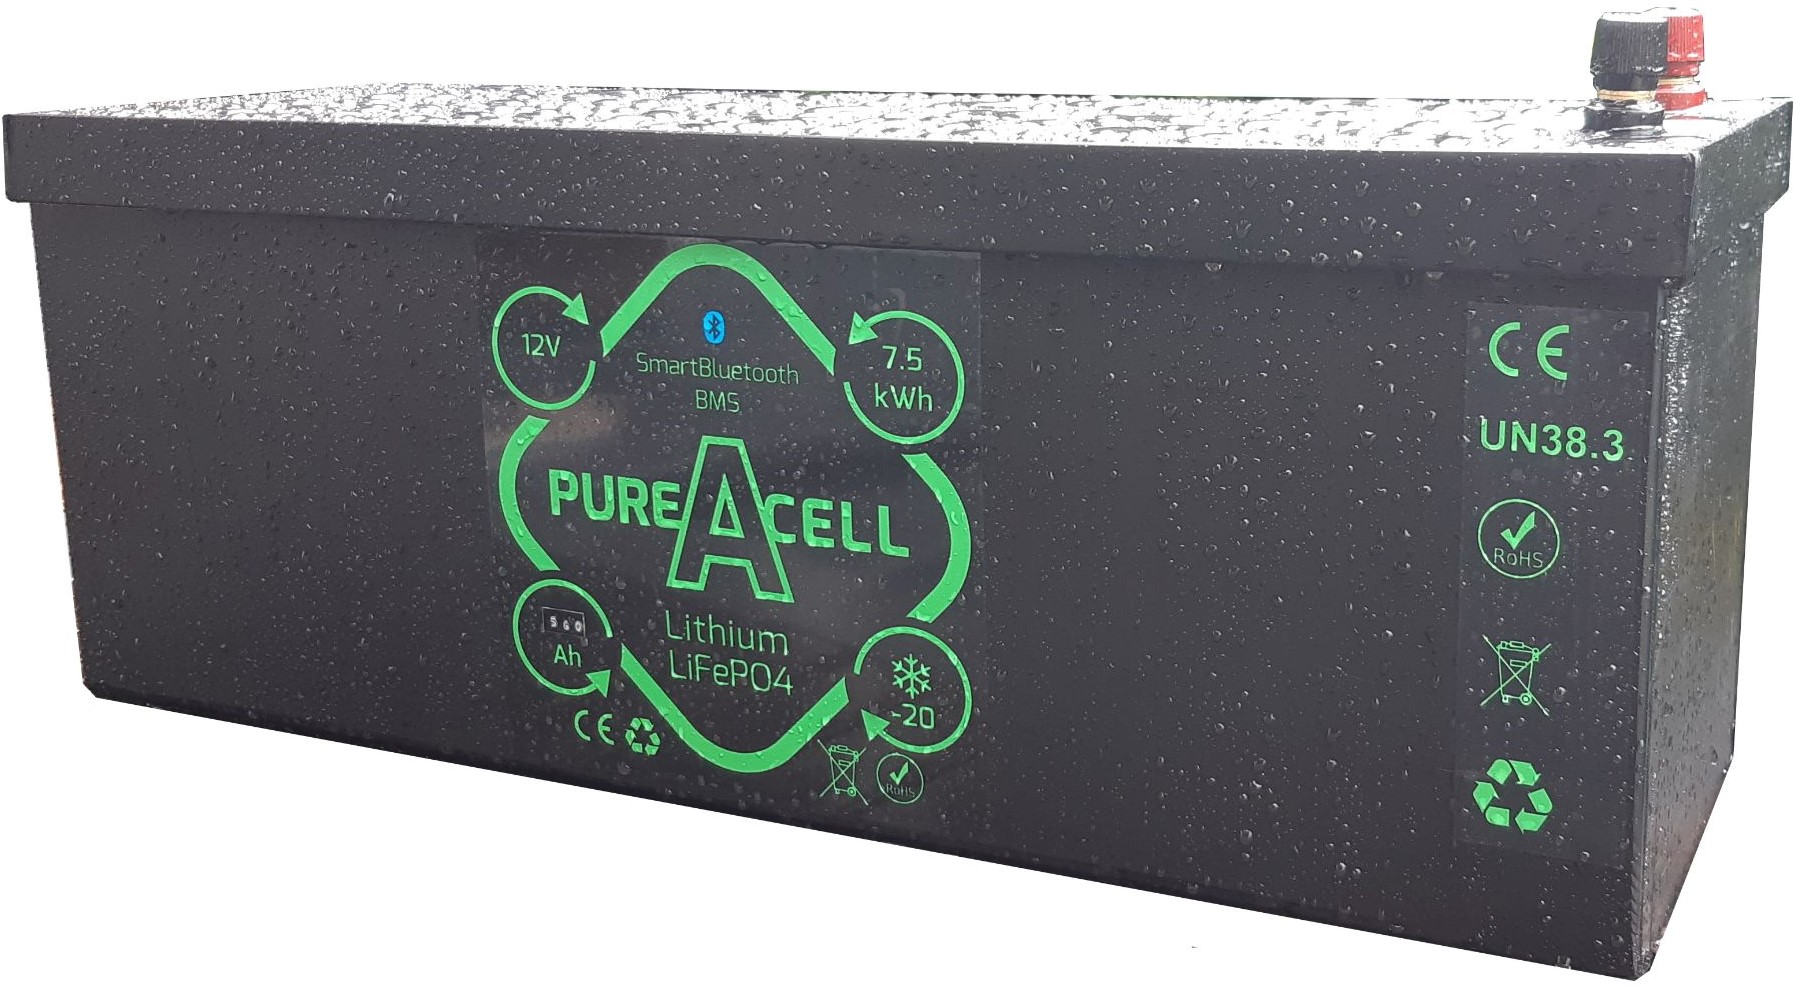 PureAcell® LiFePO4 12v 560Ah / 7.4kWh Lithium accu George Kniest